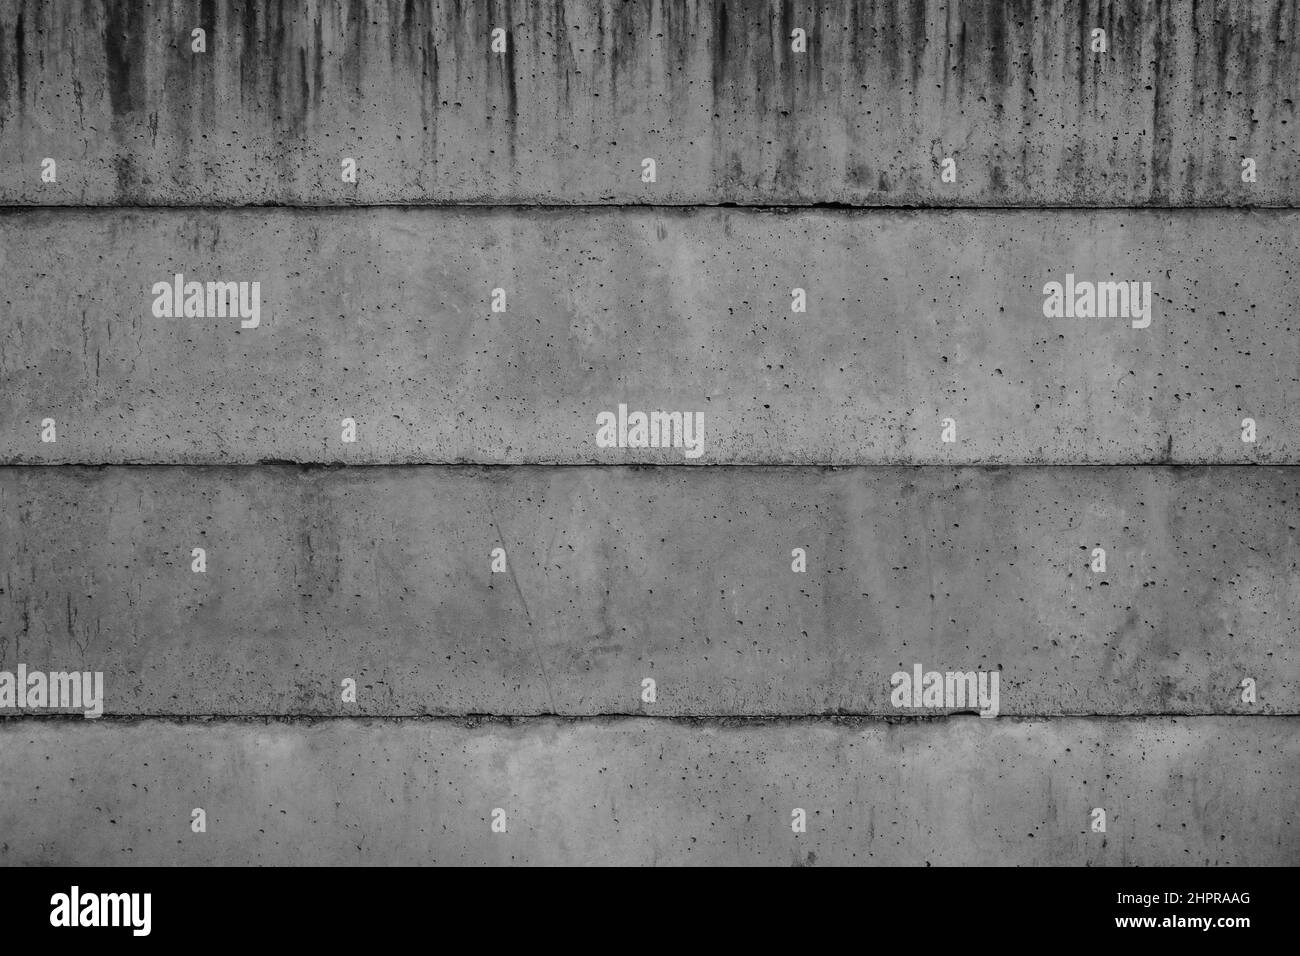 Damaged and abandoned old concrete wall texture. Stock Photo